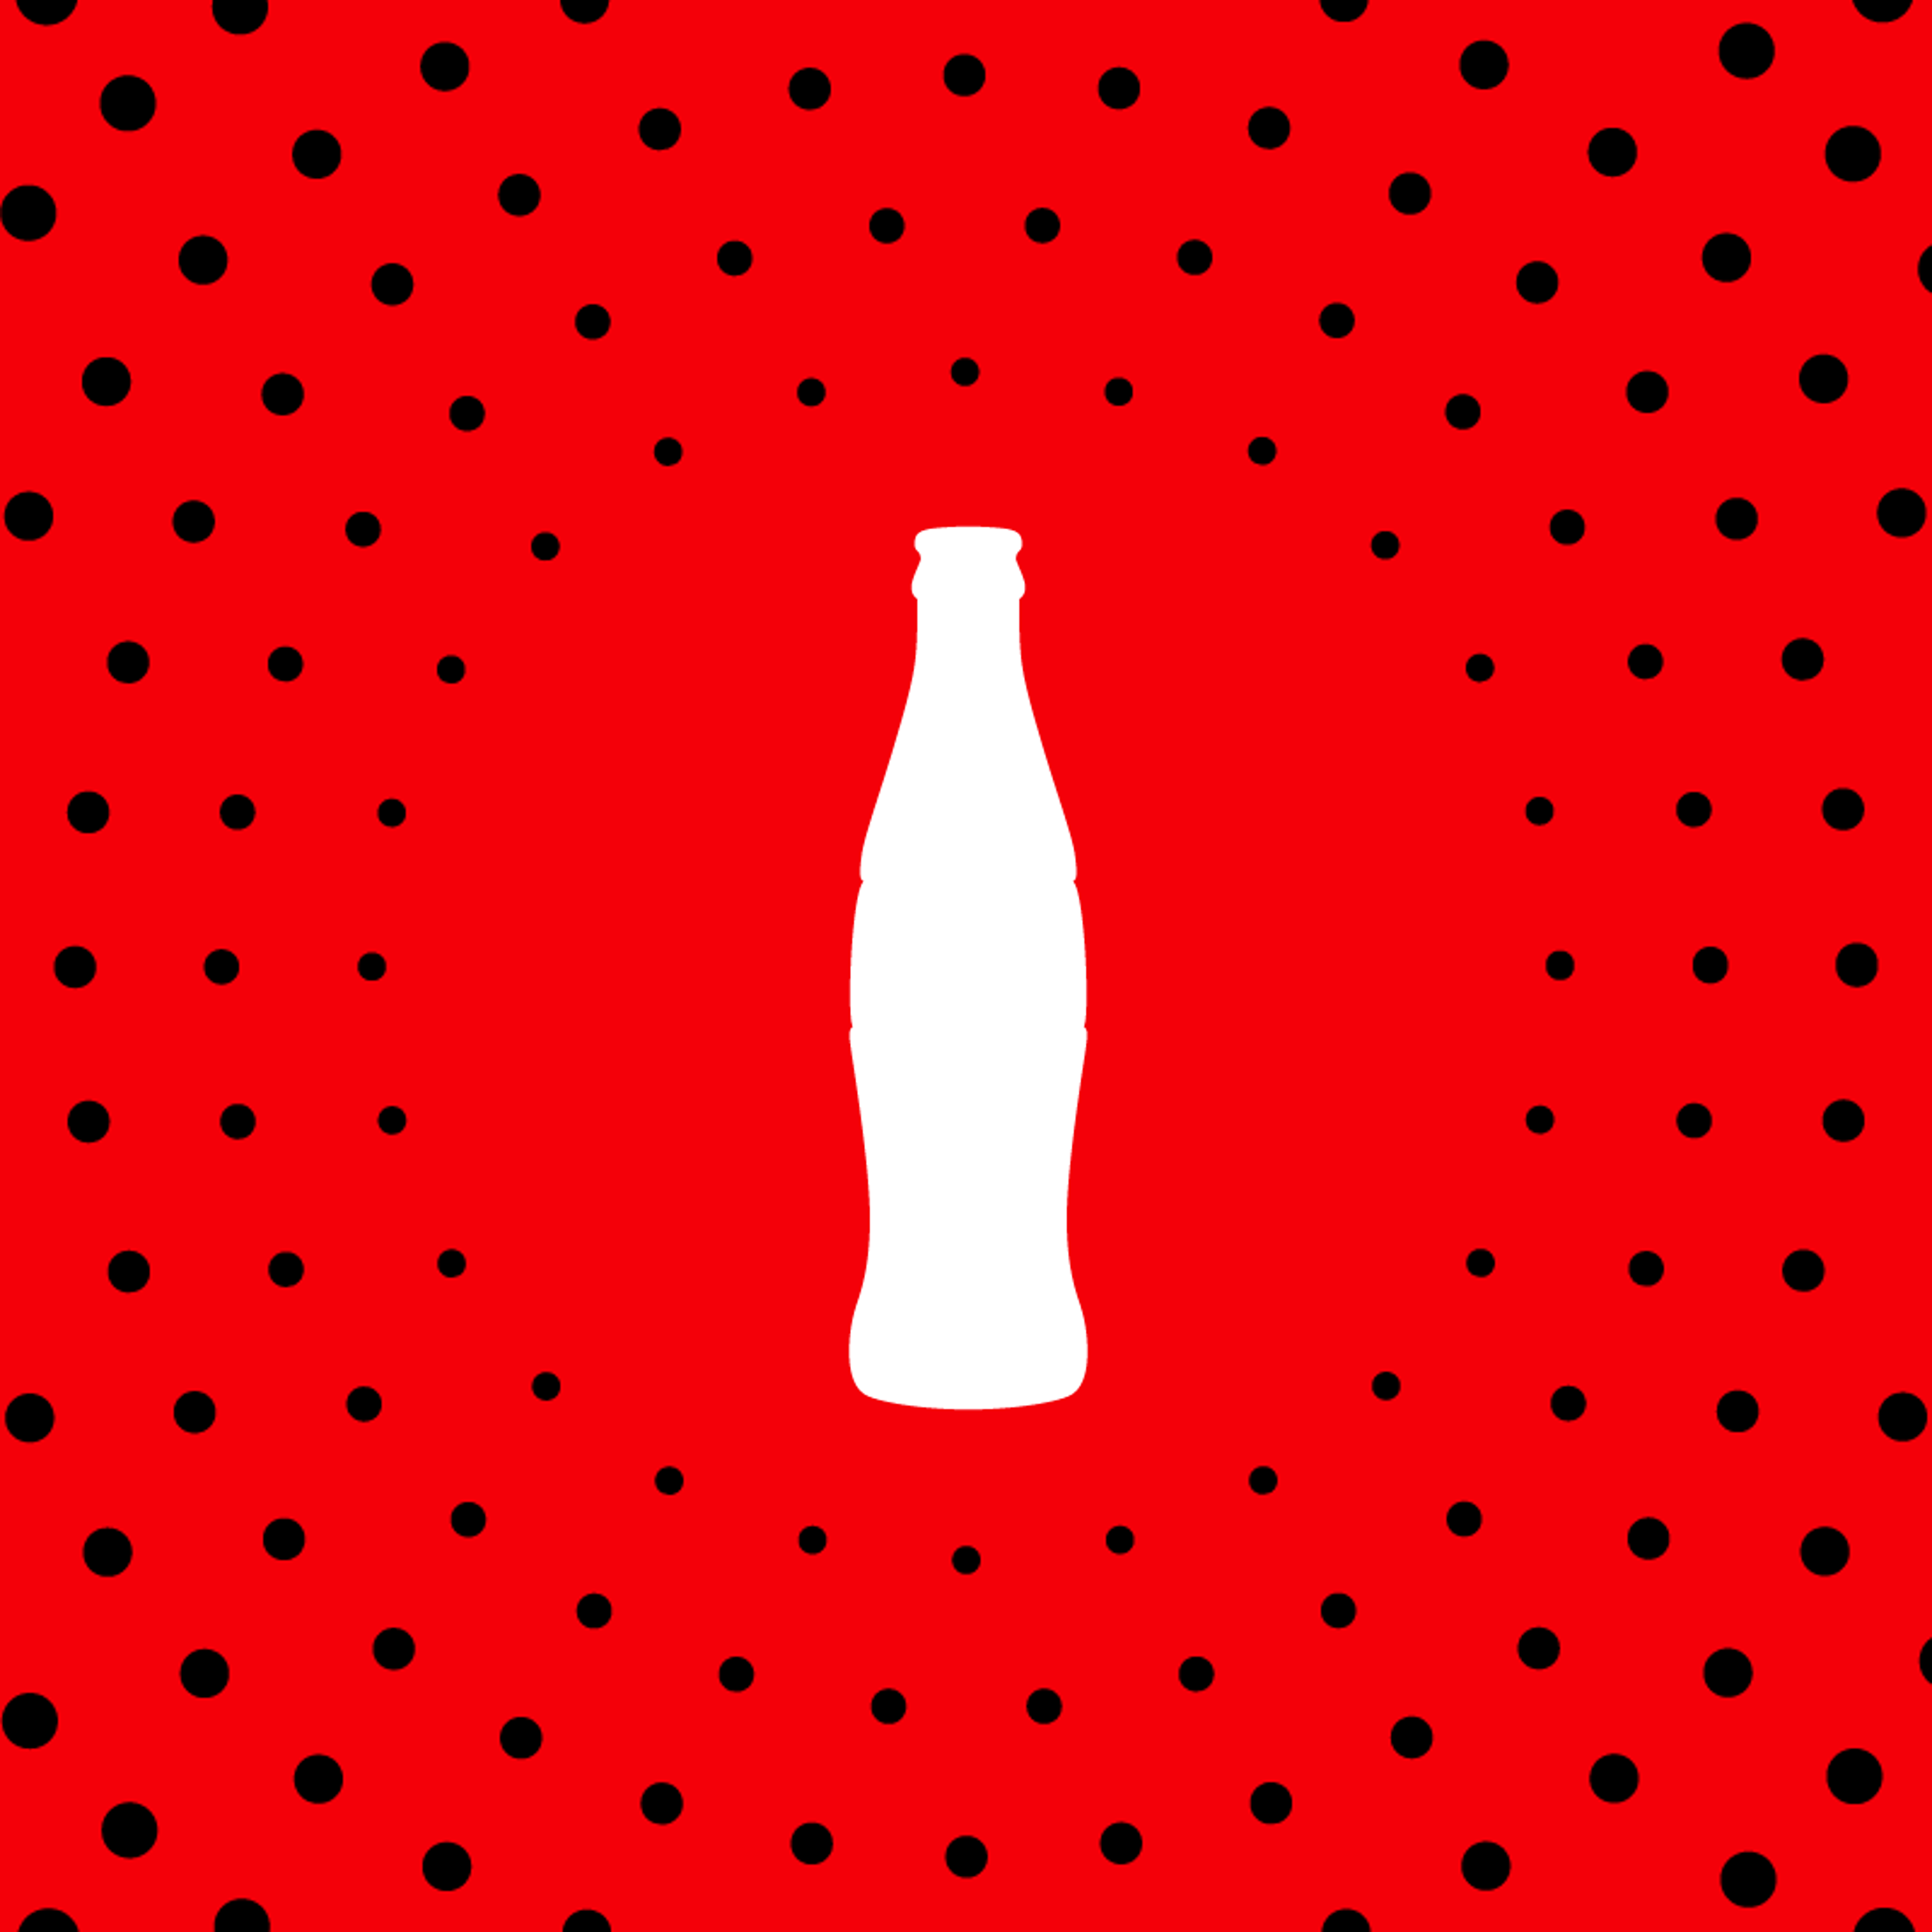 icon showing a traditional coke bottle